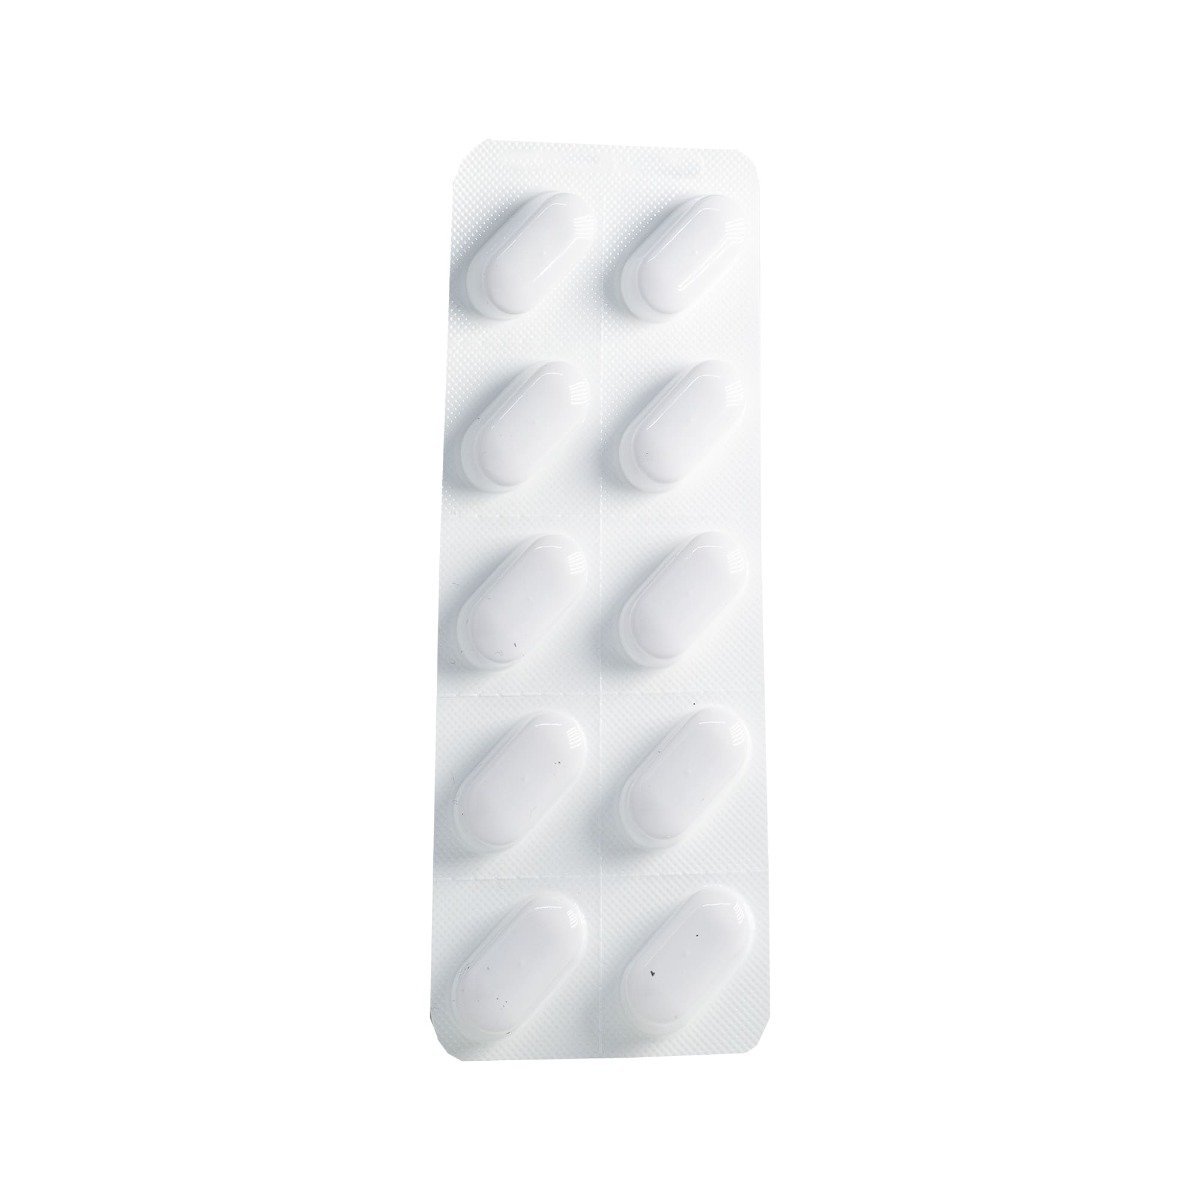 Cellcept 500 mg - 50 Tablets - Bloom Pharmacy